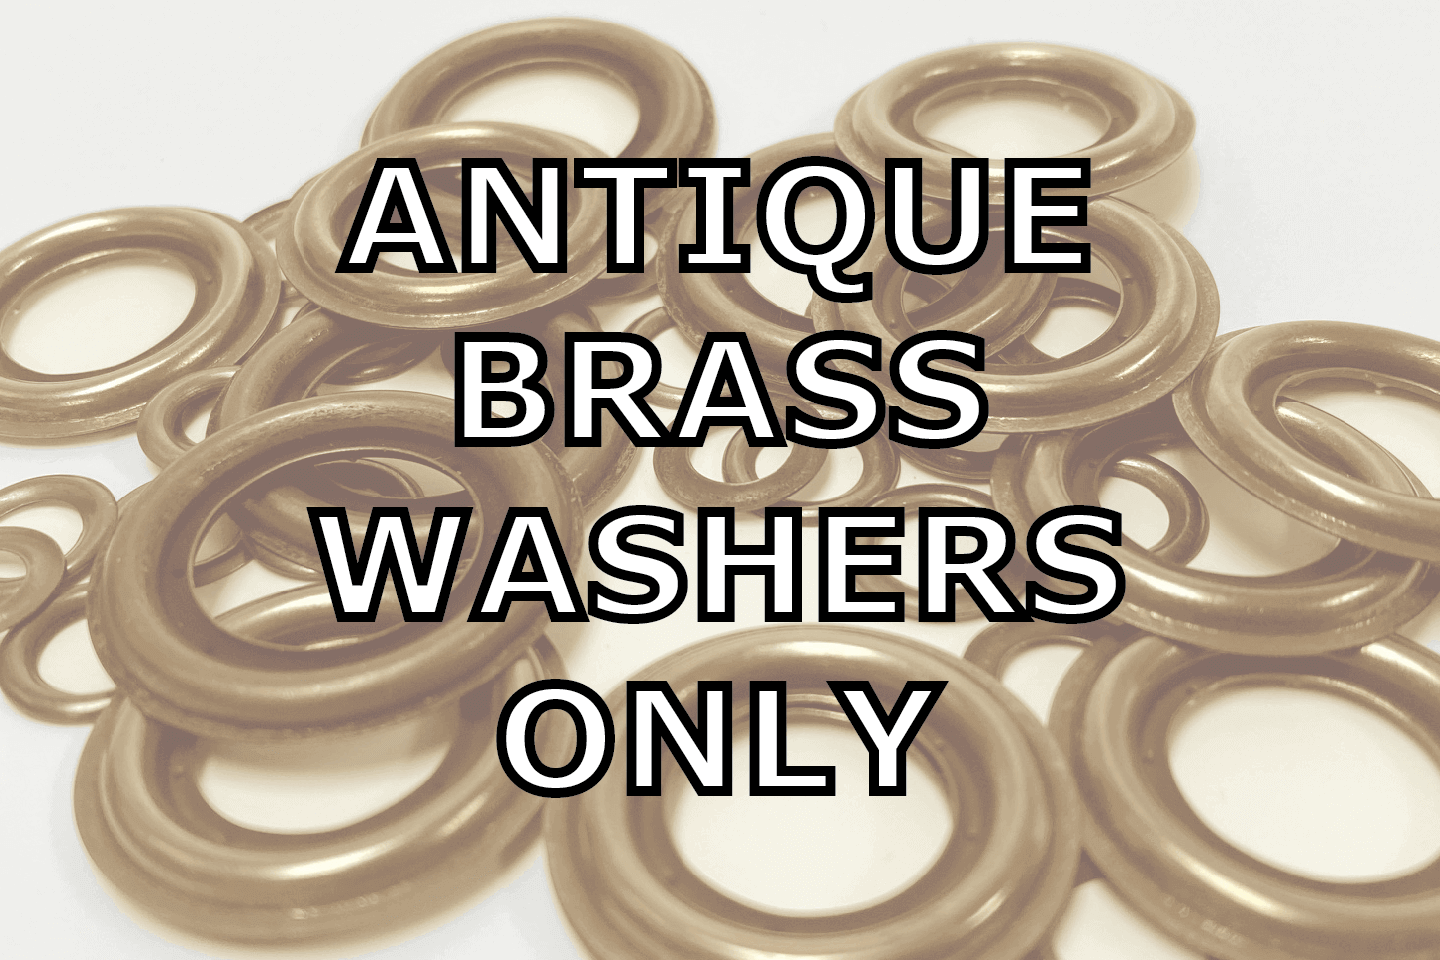 Antique Brass Washers Only